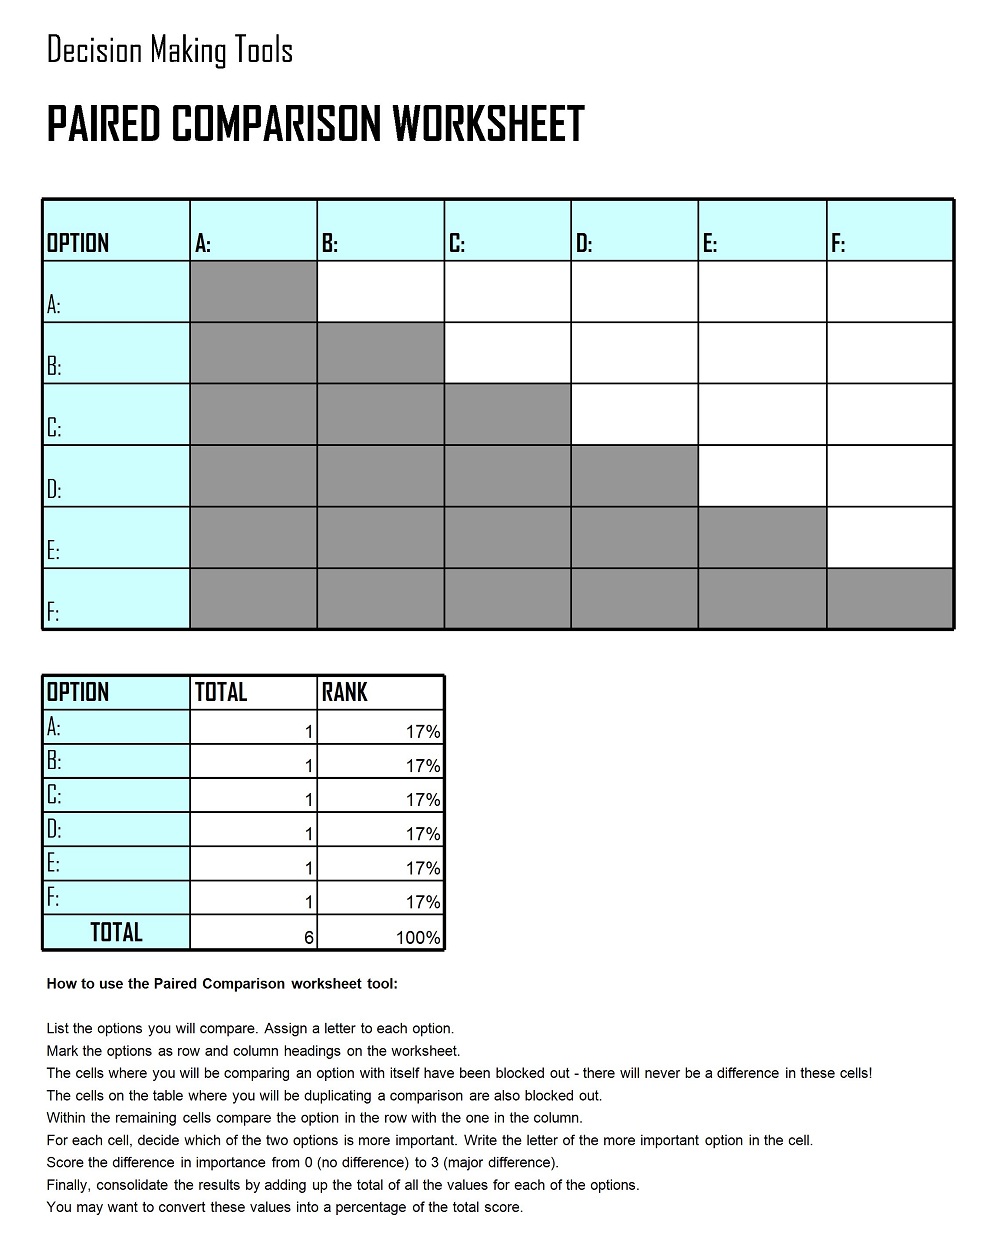 Paired Comparison Worksheet Excel